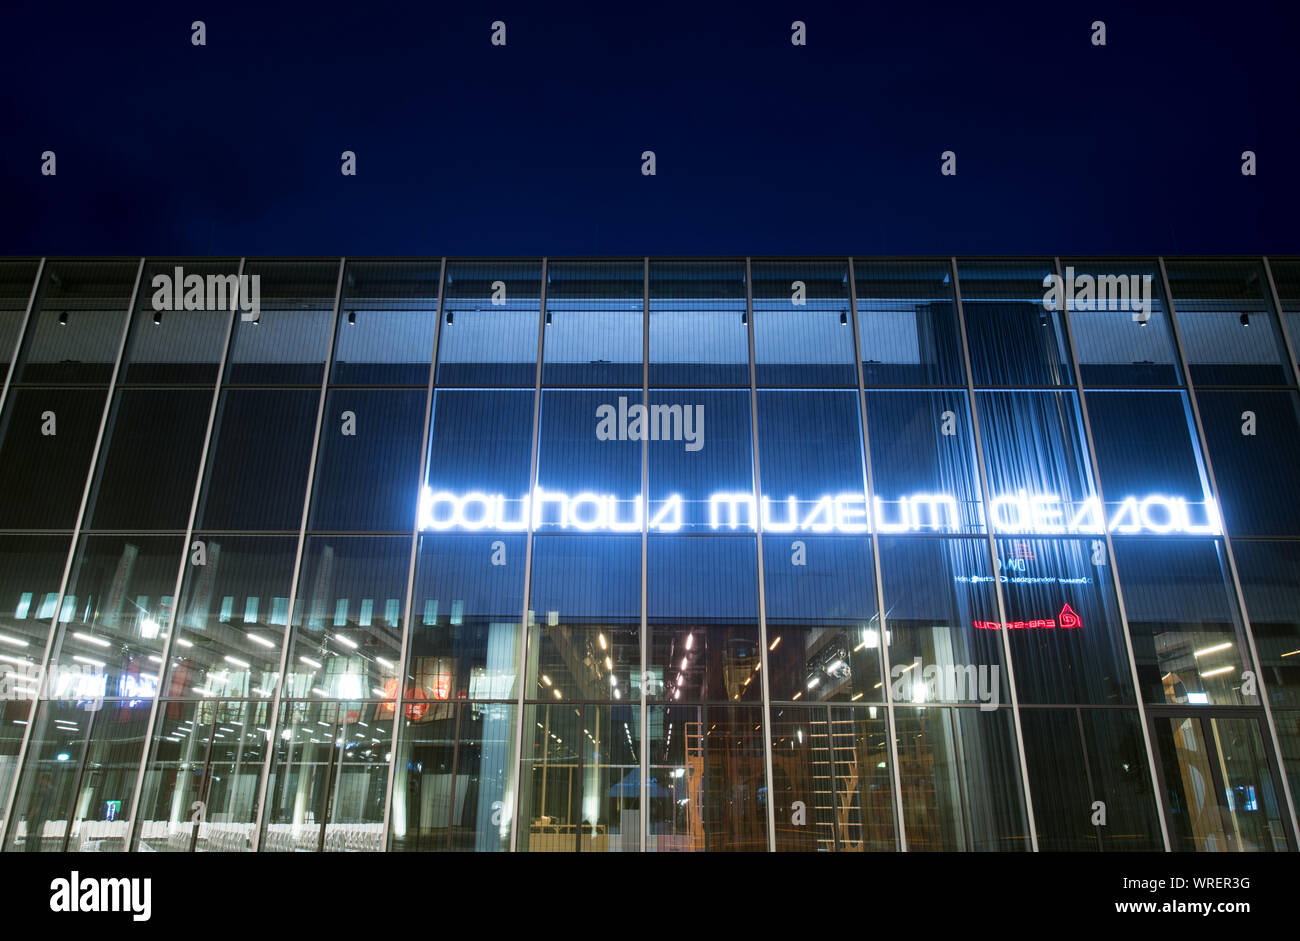 07 September 2019, Saxony-Anhalt, Dessau-Roßlau: View of the new Bauhaus Museum, designed by Addenda Architects from Barcelona. The exhibition is entitled 'Versuchsstätte Bauhaus. The Collection'. Around 1,000 exhibits will be on show, illustrating the special and worldwide influence of the legendary school of architecture, art and design. The new building for 28.5 million euros was built according to a design by Spanish architects. The Dessau Bauhaus collection is the second largest in the world. Photo: Hendrik Schmidt/dpa-Zentralbild/ZB Stock Photo